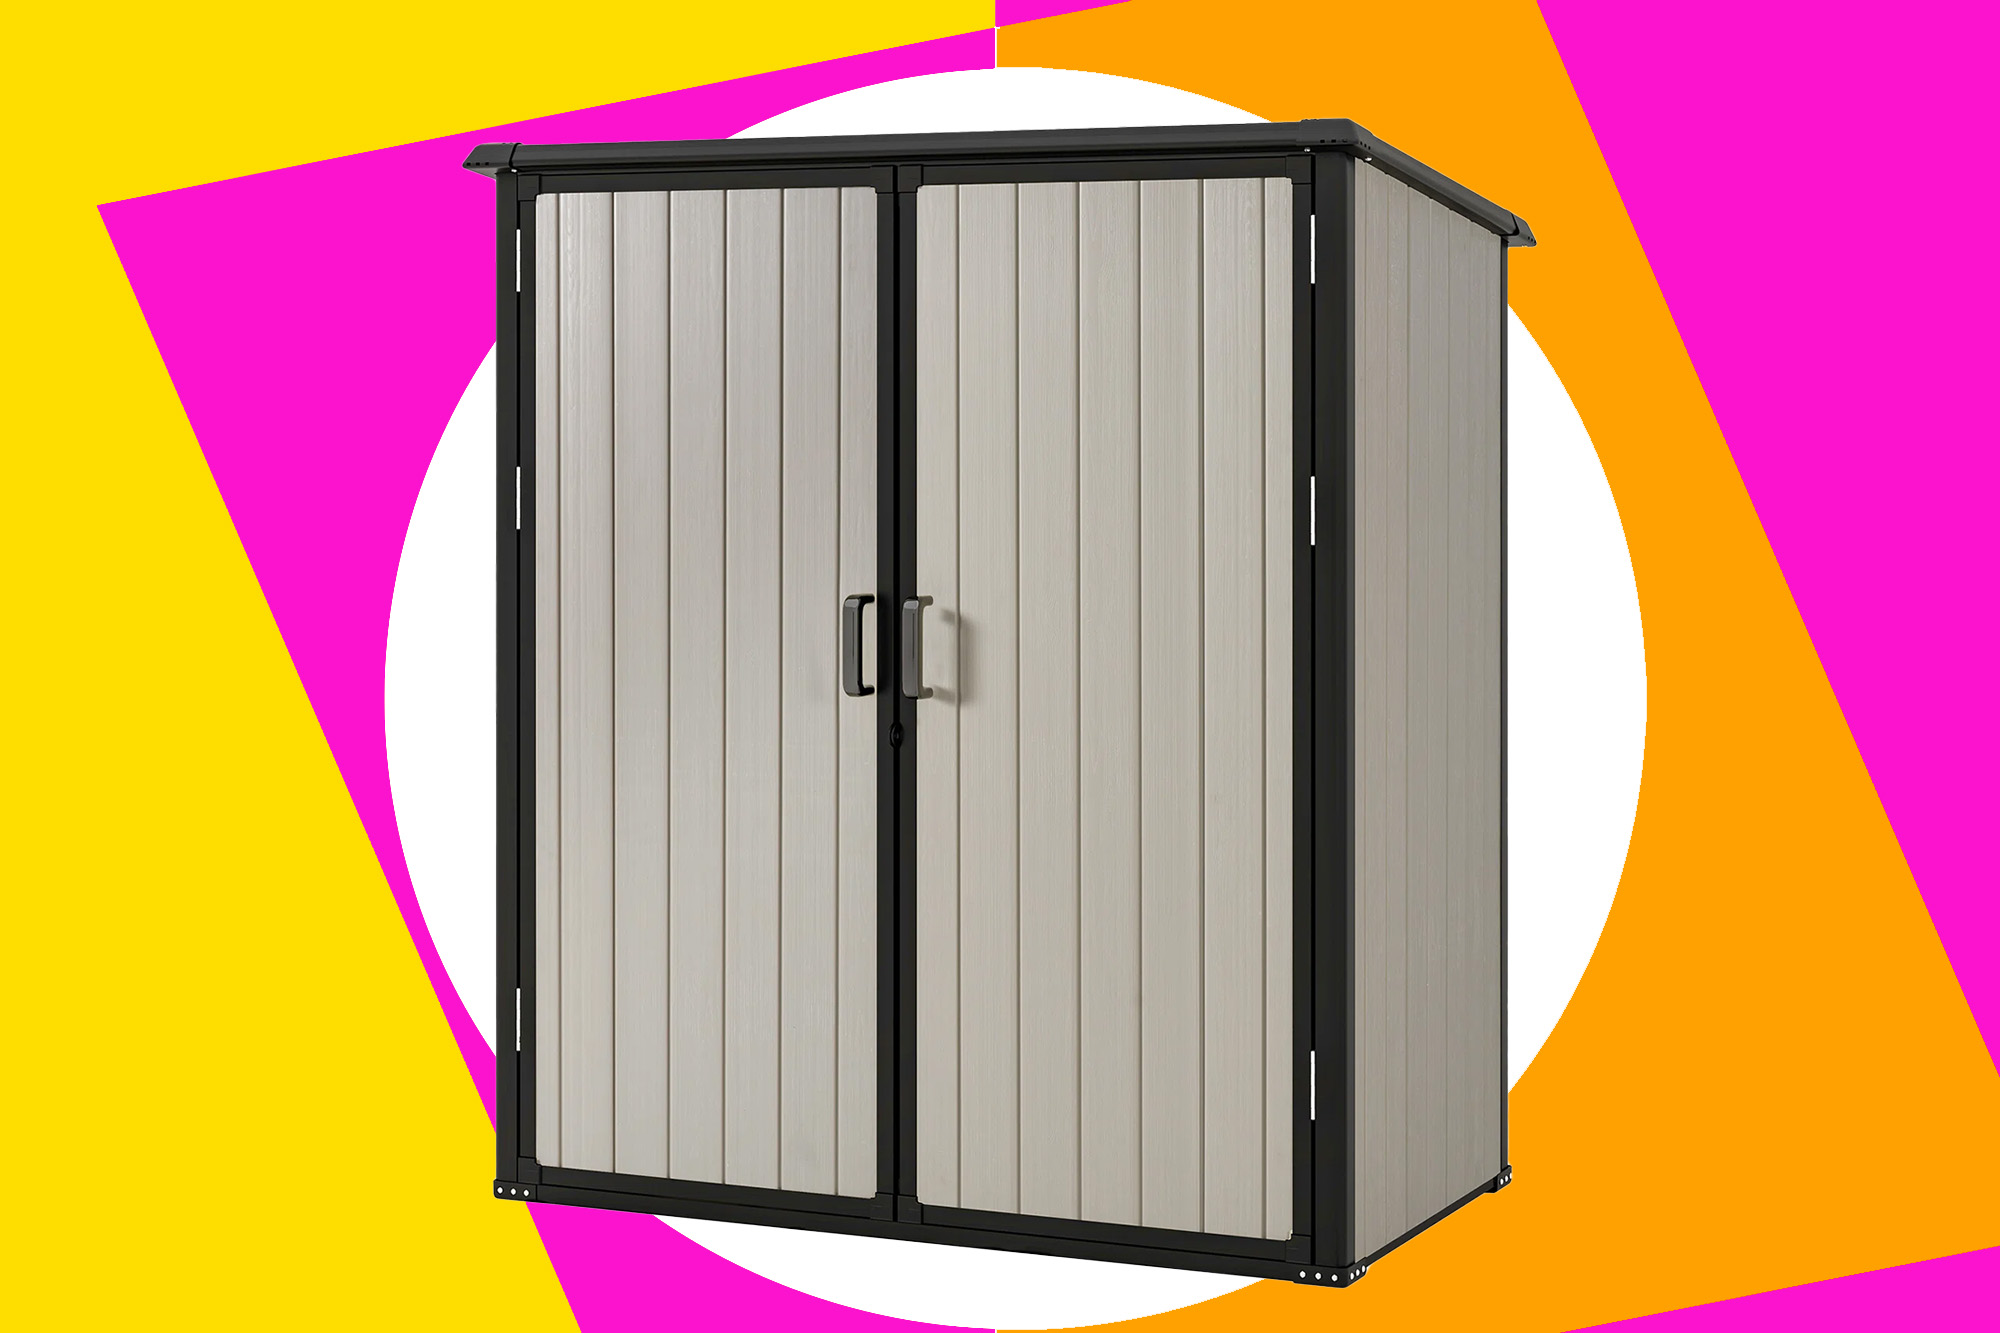 A grey shed with black trim